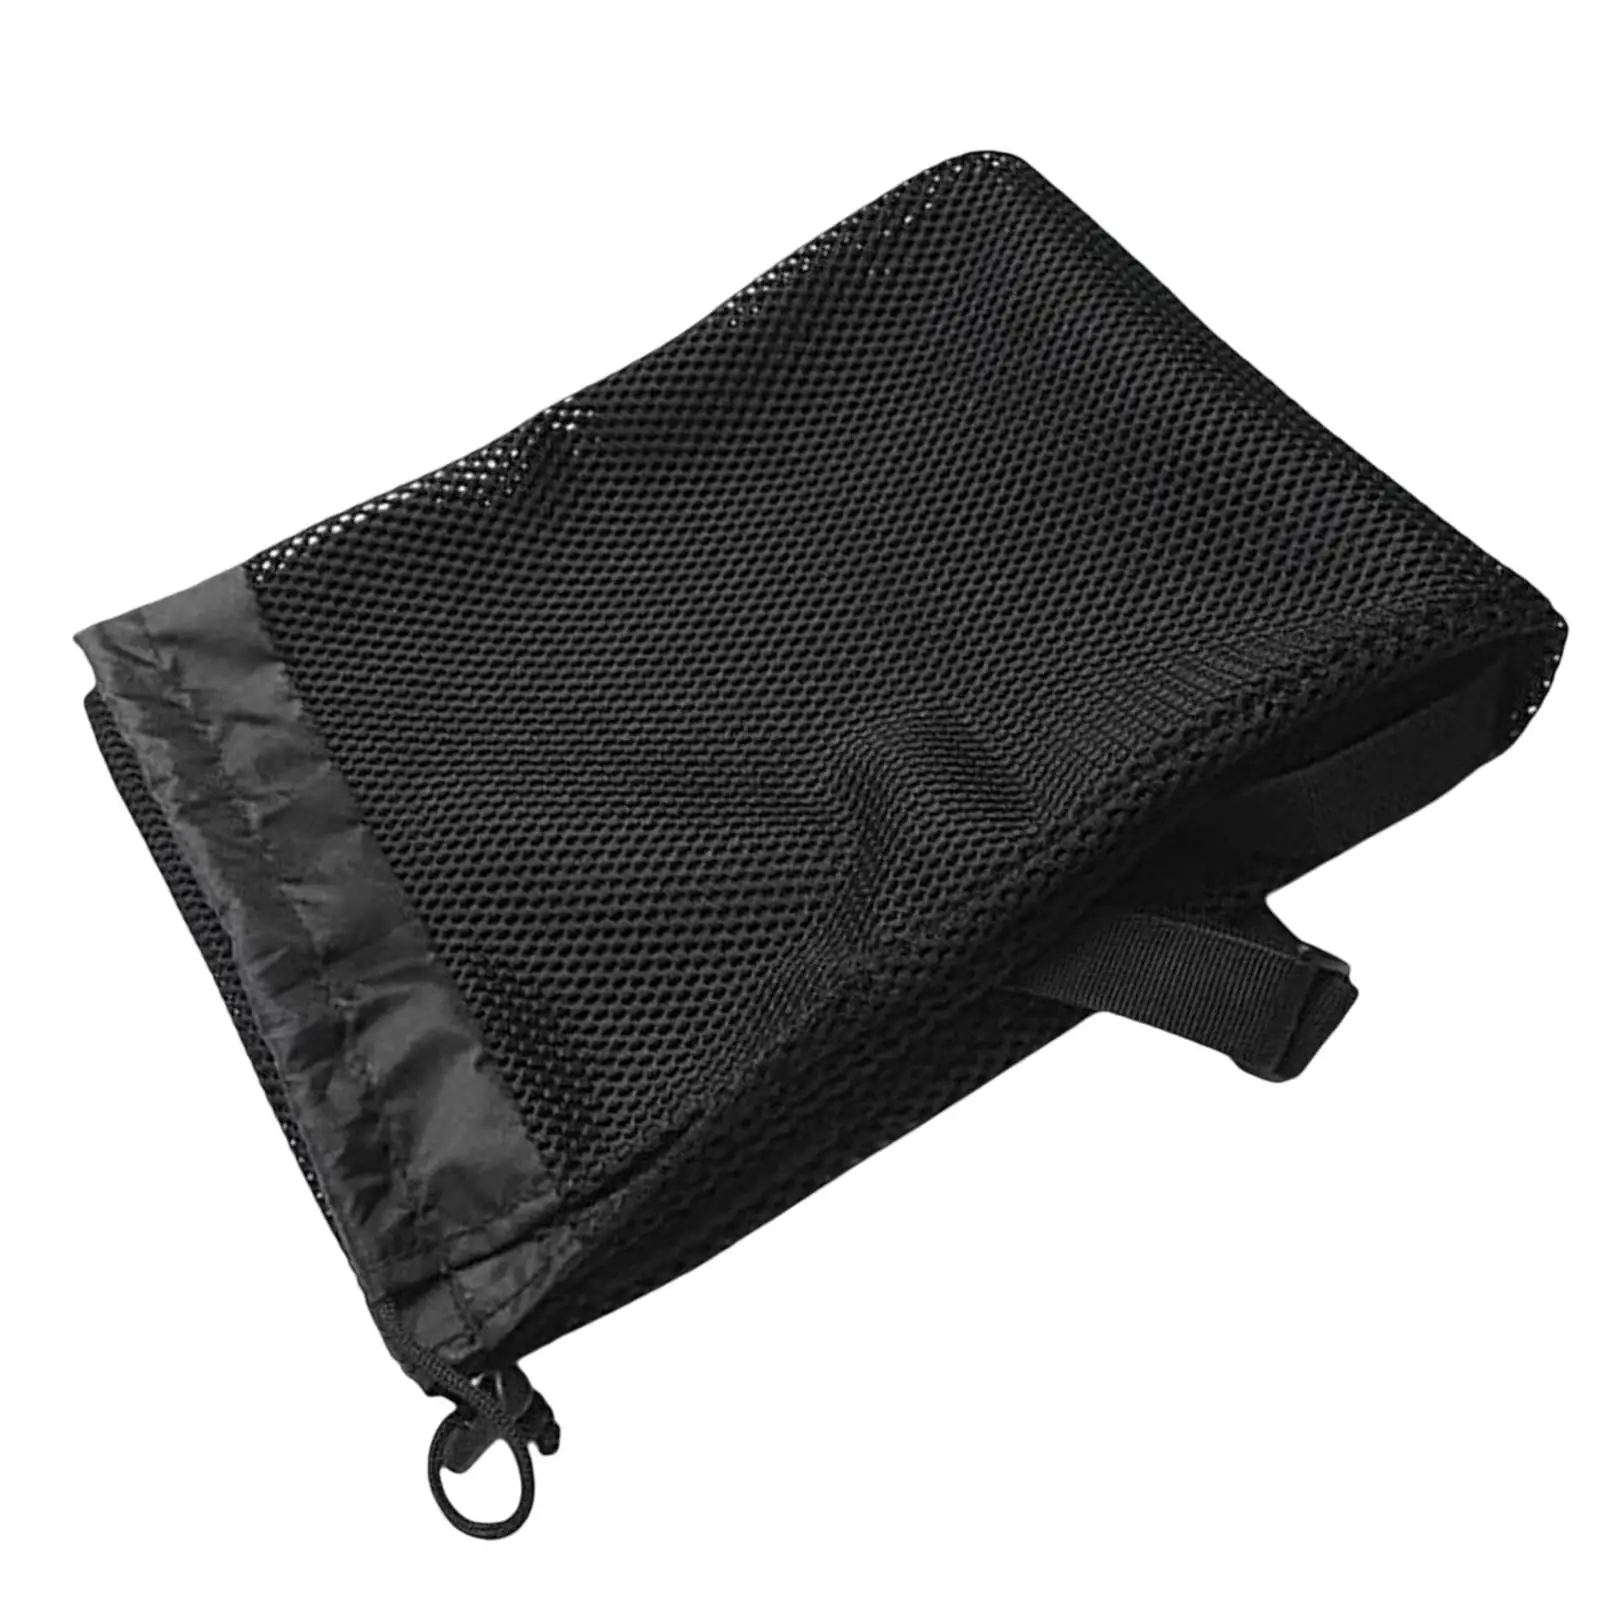 Portable  Storage Bag with Adjustable Strap Boat Paddle Carrying Bag Pouch Drawstring Mesh Case Protector Cover